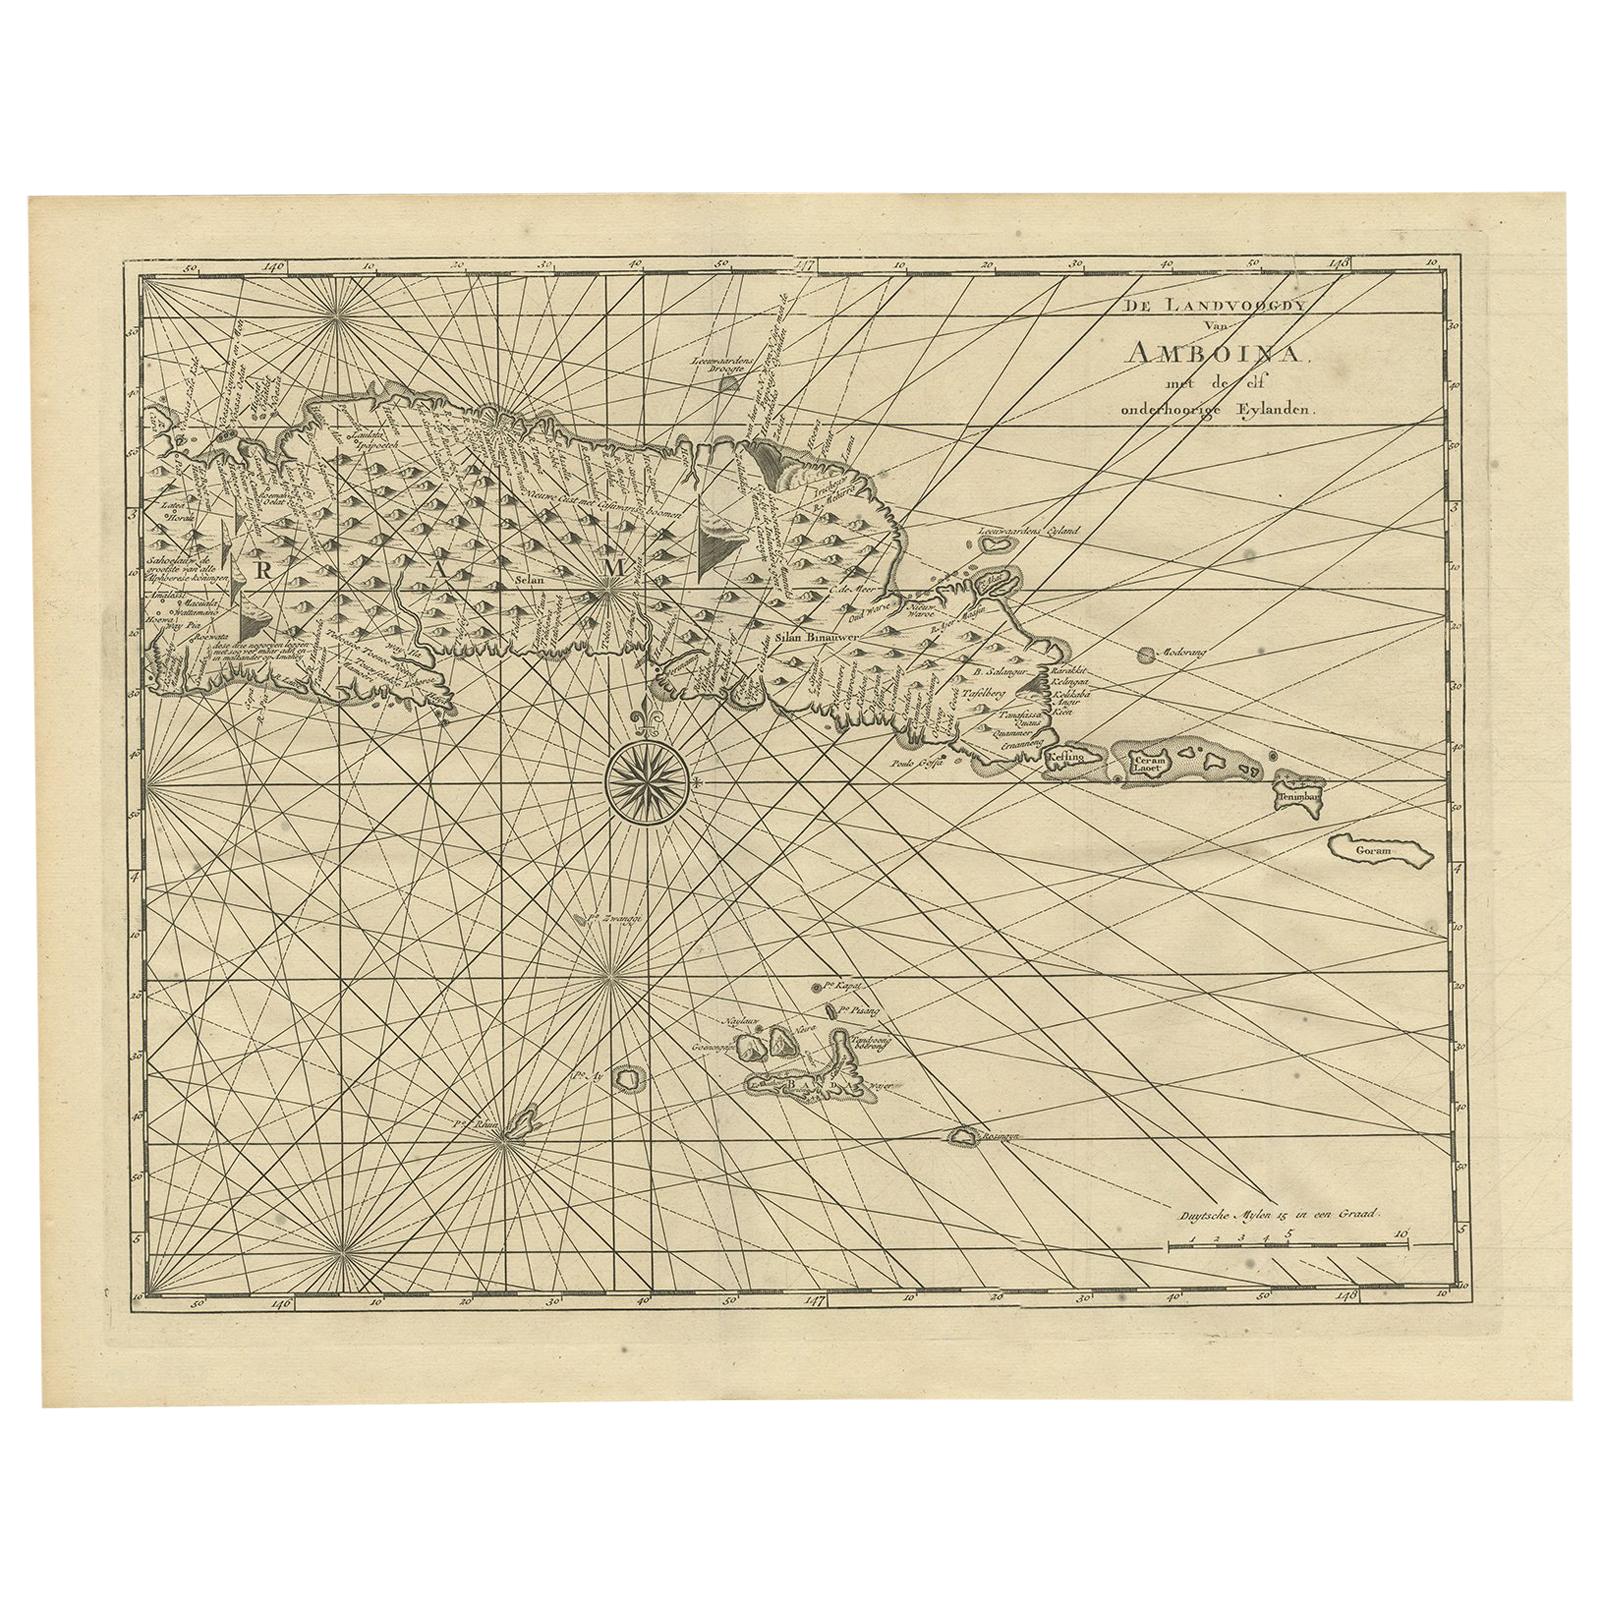 Antique Map of Ambon and Surroundings by Valentijn '1726'